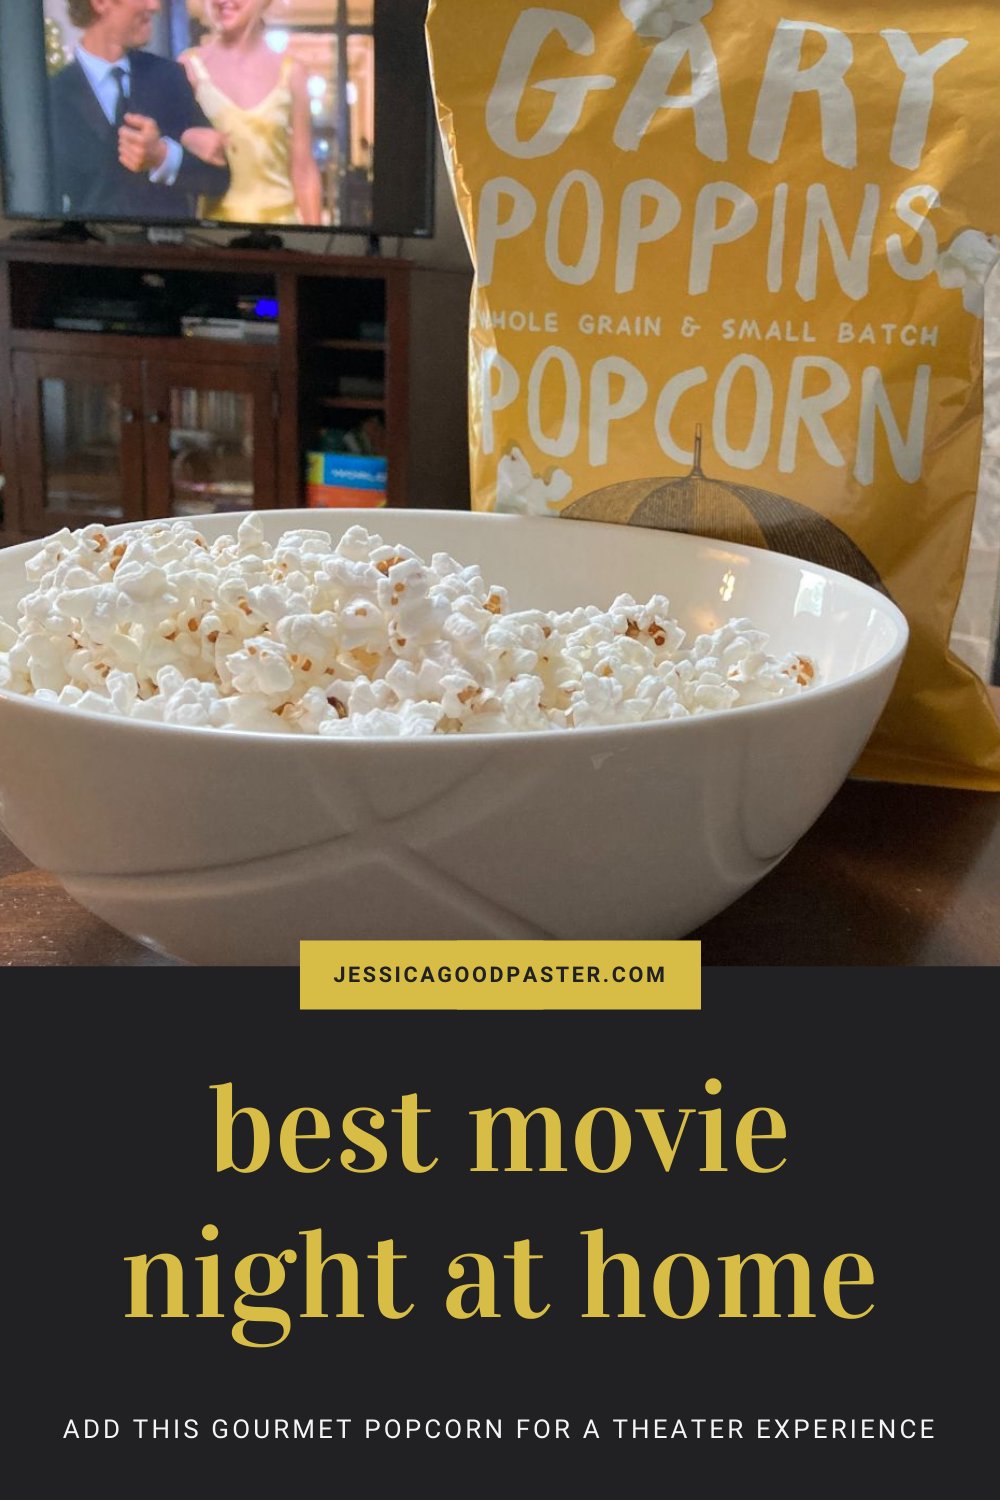 Have the Best Movie Night at Home with Gary Poppins Popcorn | Learn all about this handcrafted gourmet popcorn in my Gary Poppins review. Find unique sweet and savory flavors made from yummy recipes and seasonings that are freshly popped and sent to your home. Bags and tins of multiple sizes make great teacher gifts, corporate gifts, wedding favors, stocking stuffers, or a perfect movie theater night at home! Plus, get a coupon code for a discount. #popcorn #gourmetpopcorn #snackideas #stockingstuffer #weddingfavor #giftbasket #teachergifts #giftideas